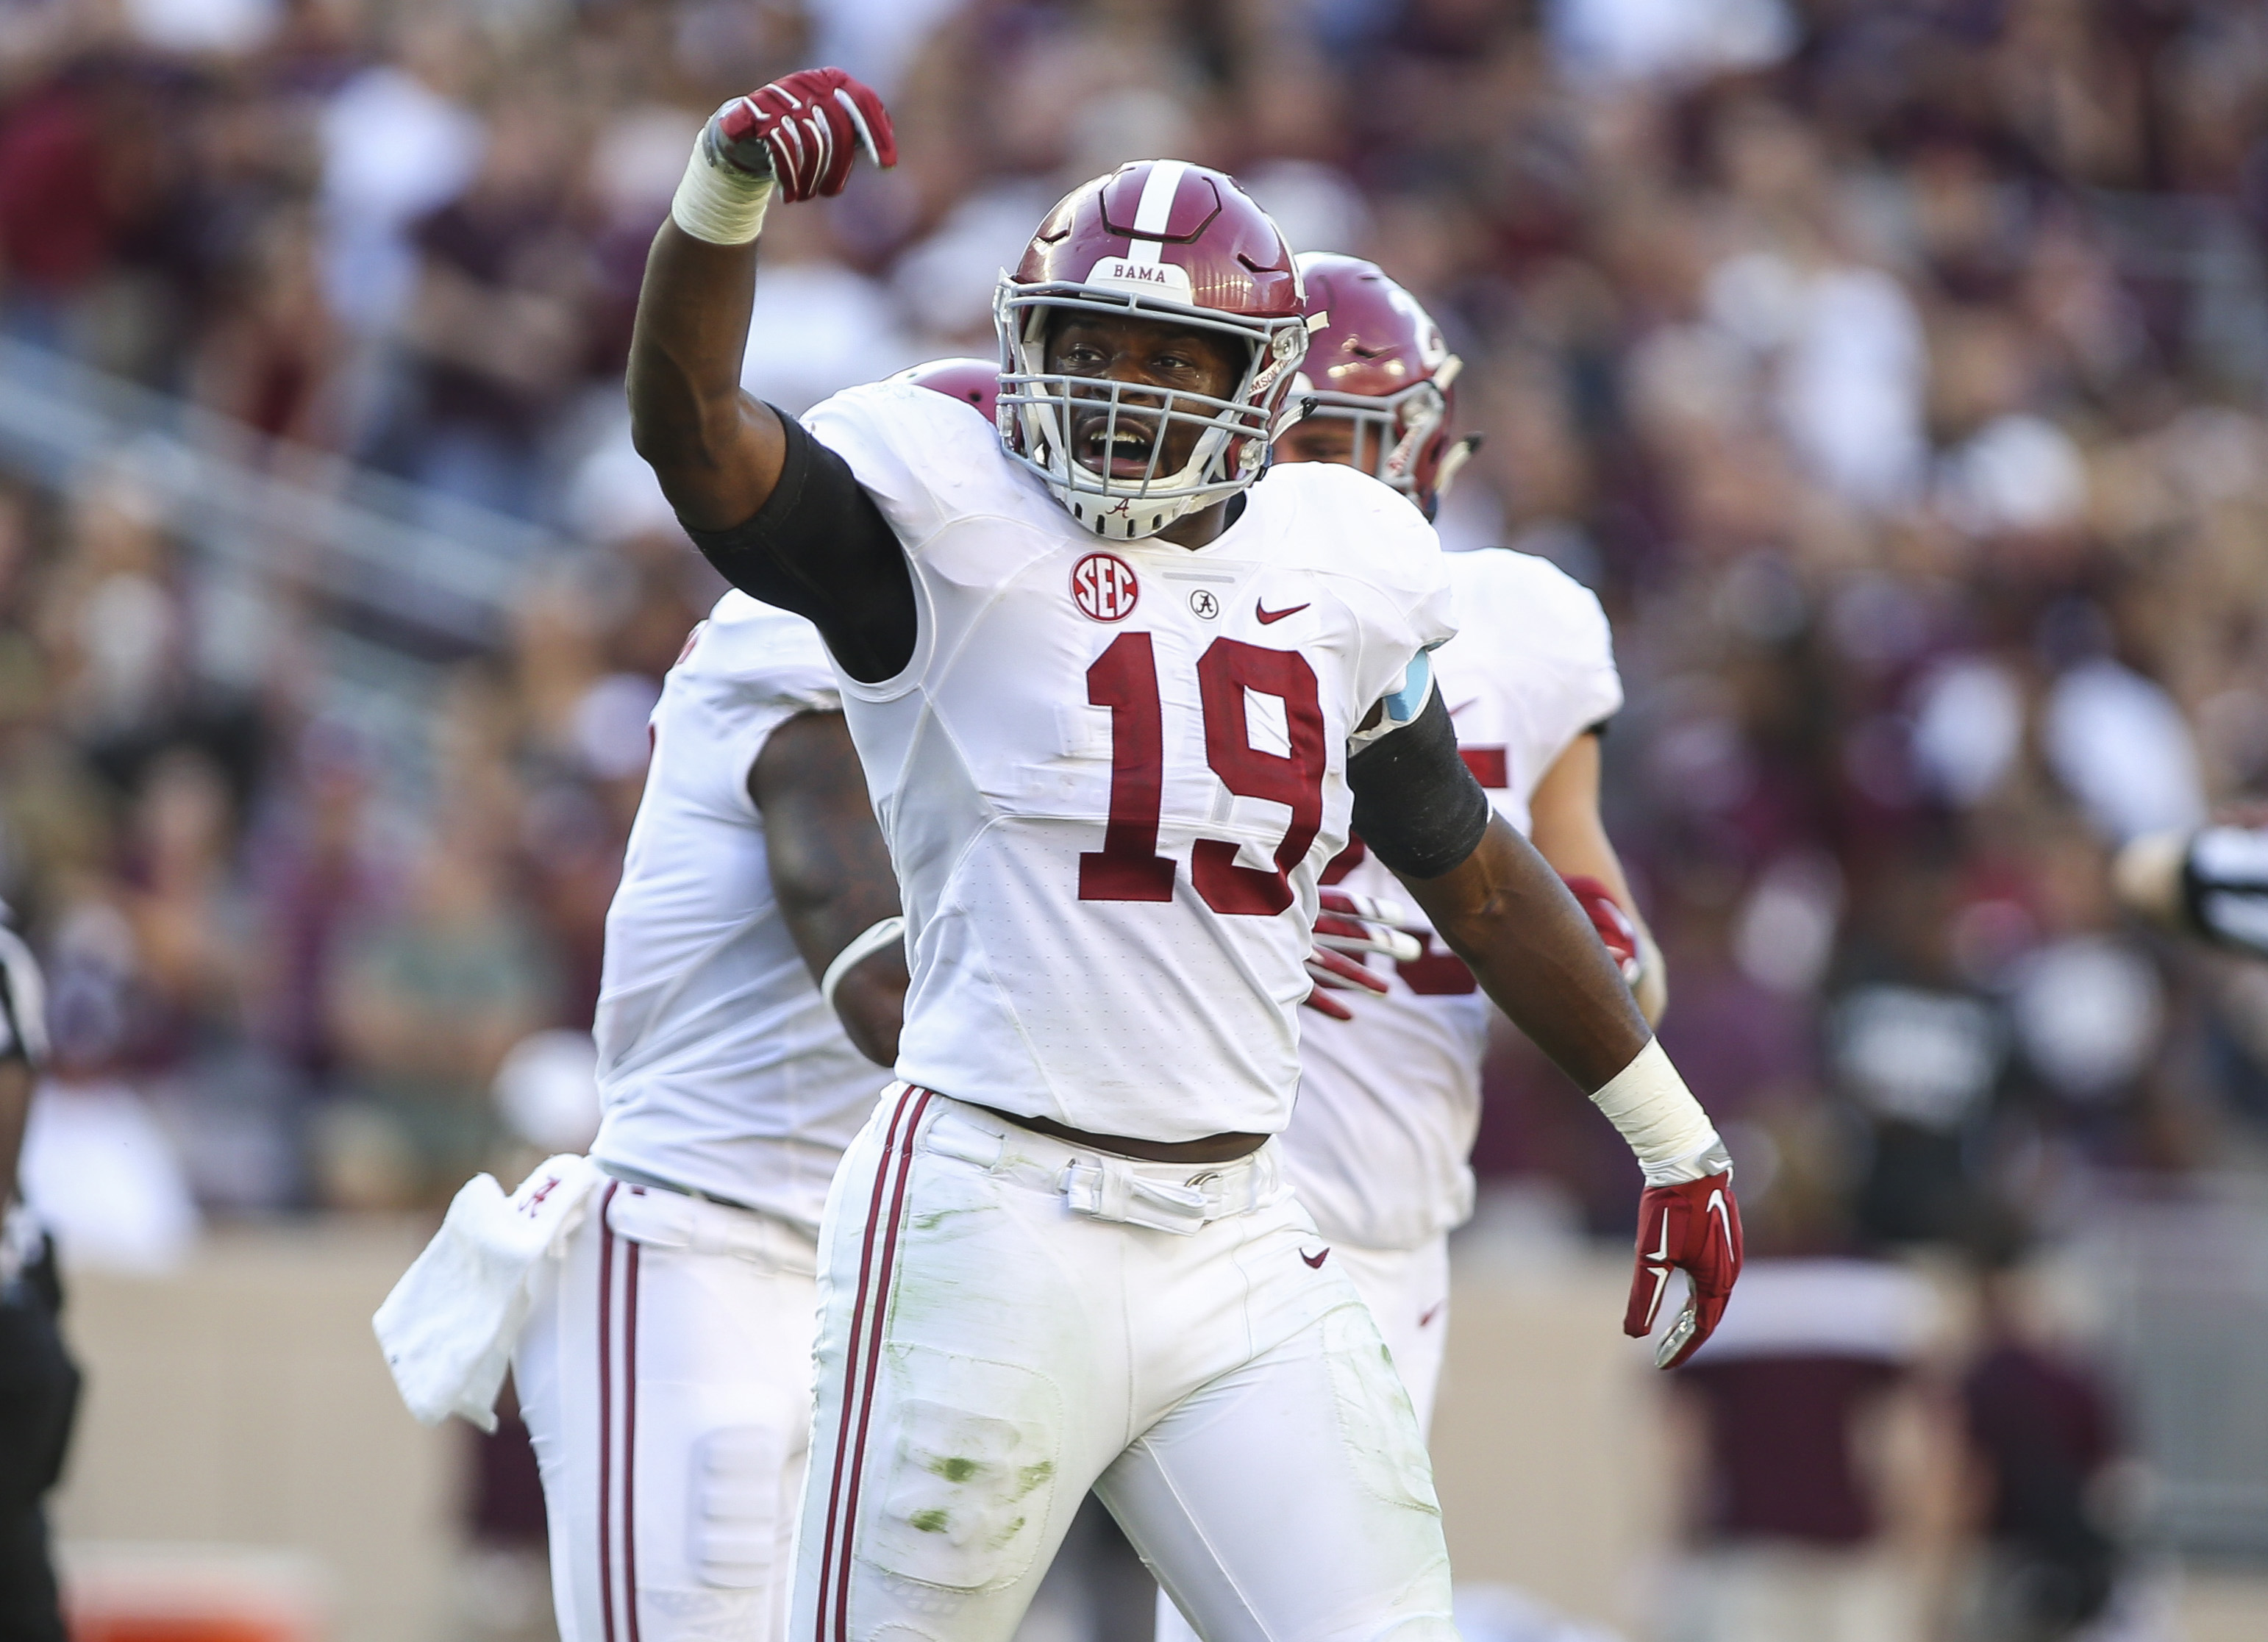 Oct 17, 2015; College Station, TX, USA; Alabama Crimson Tide linebacker Reggie Ragland (19) reacts after a play during the third quarter against the Texas A&M Aggies at Kyle Field. The Crimson Tide defeated the Aggies 41-23. Mandatory Credit: Troy Taormina-USA TODAY Sports ORG XMIT: USATSI-226926 ORIG FILE ID: 20151017_gma_at5_061.jpg